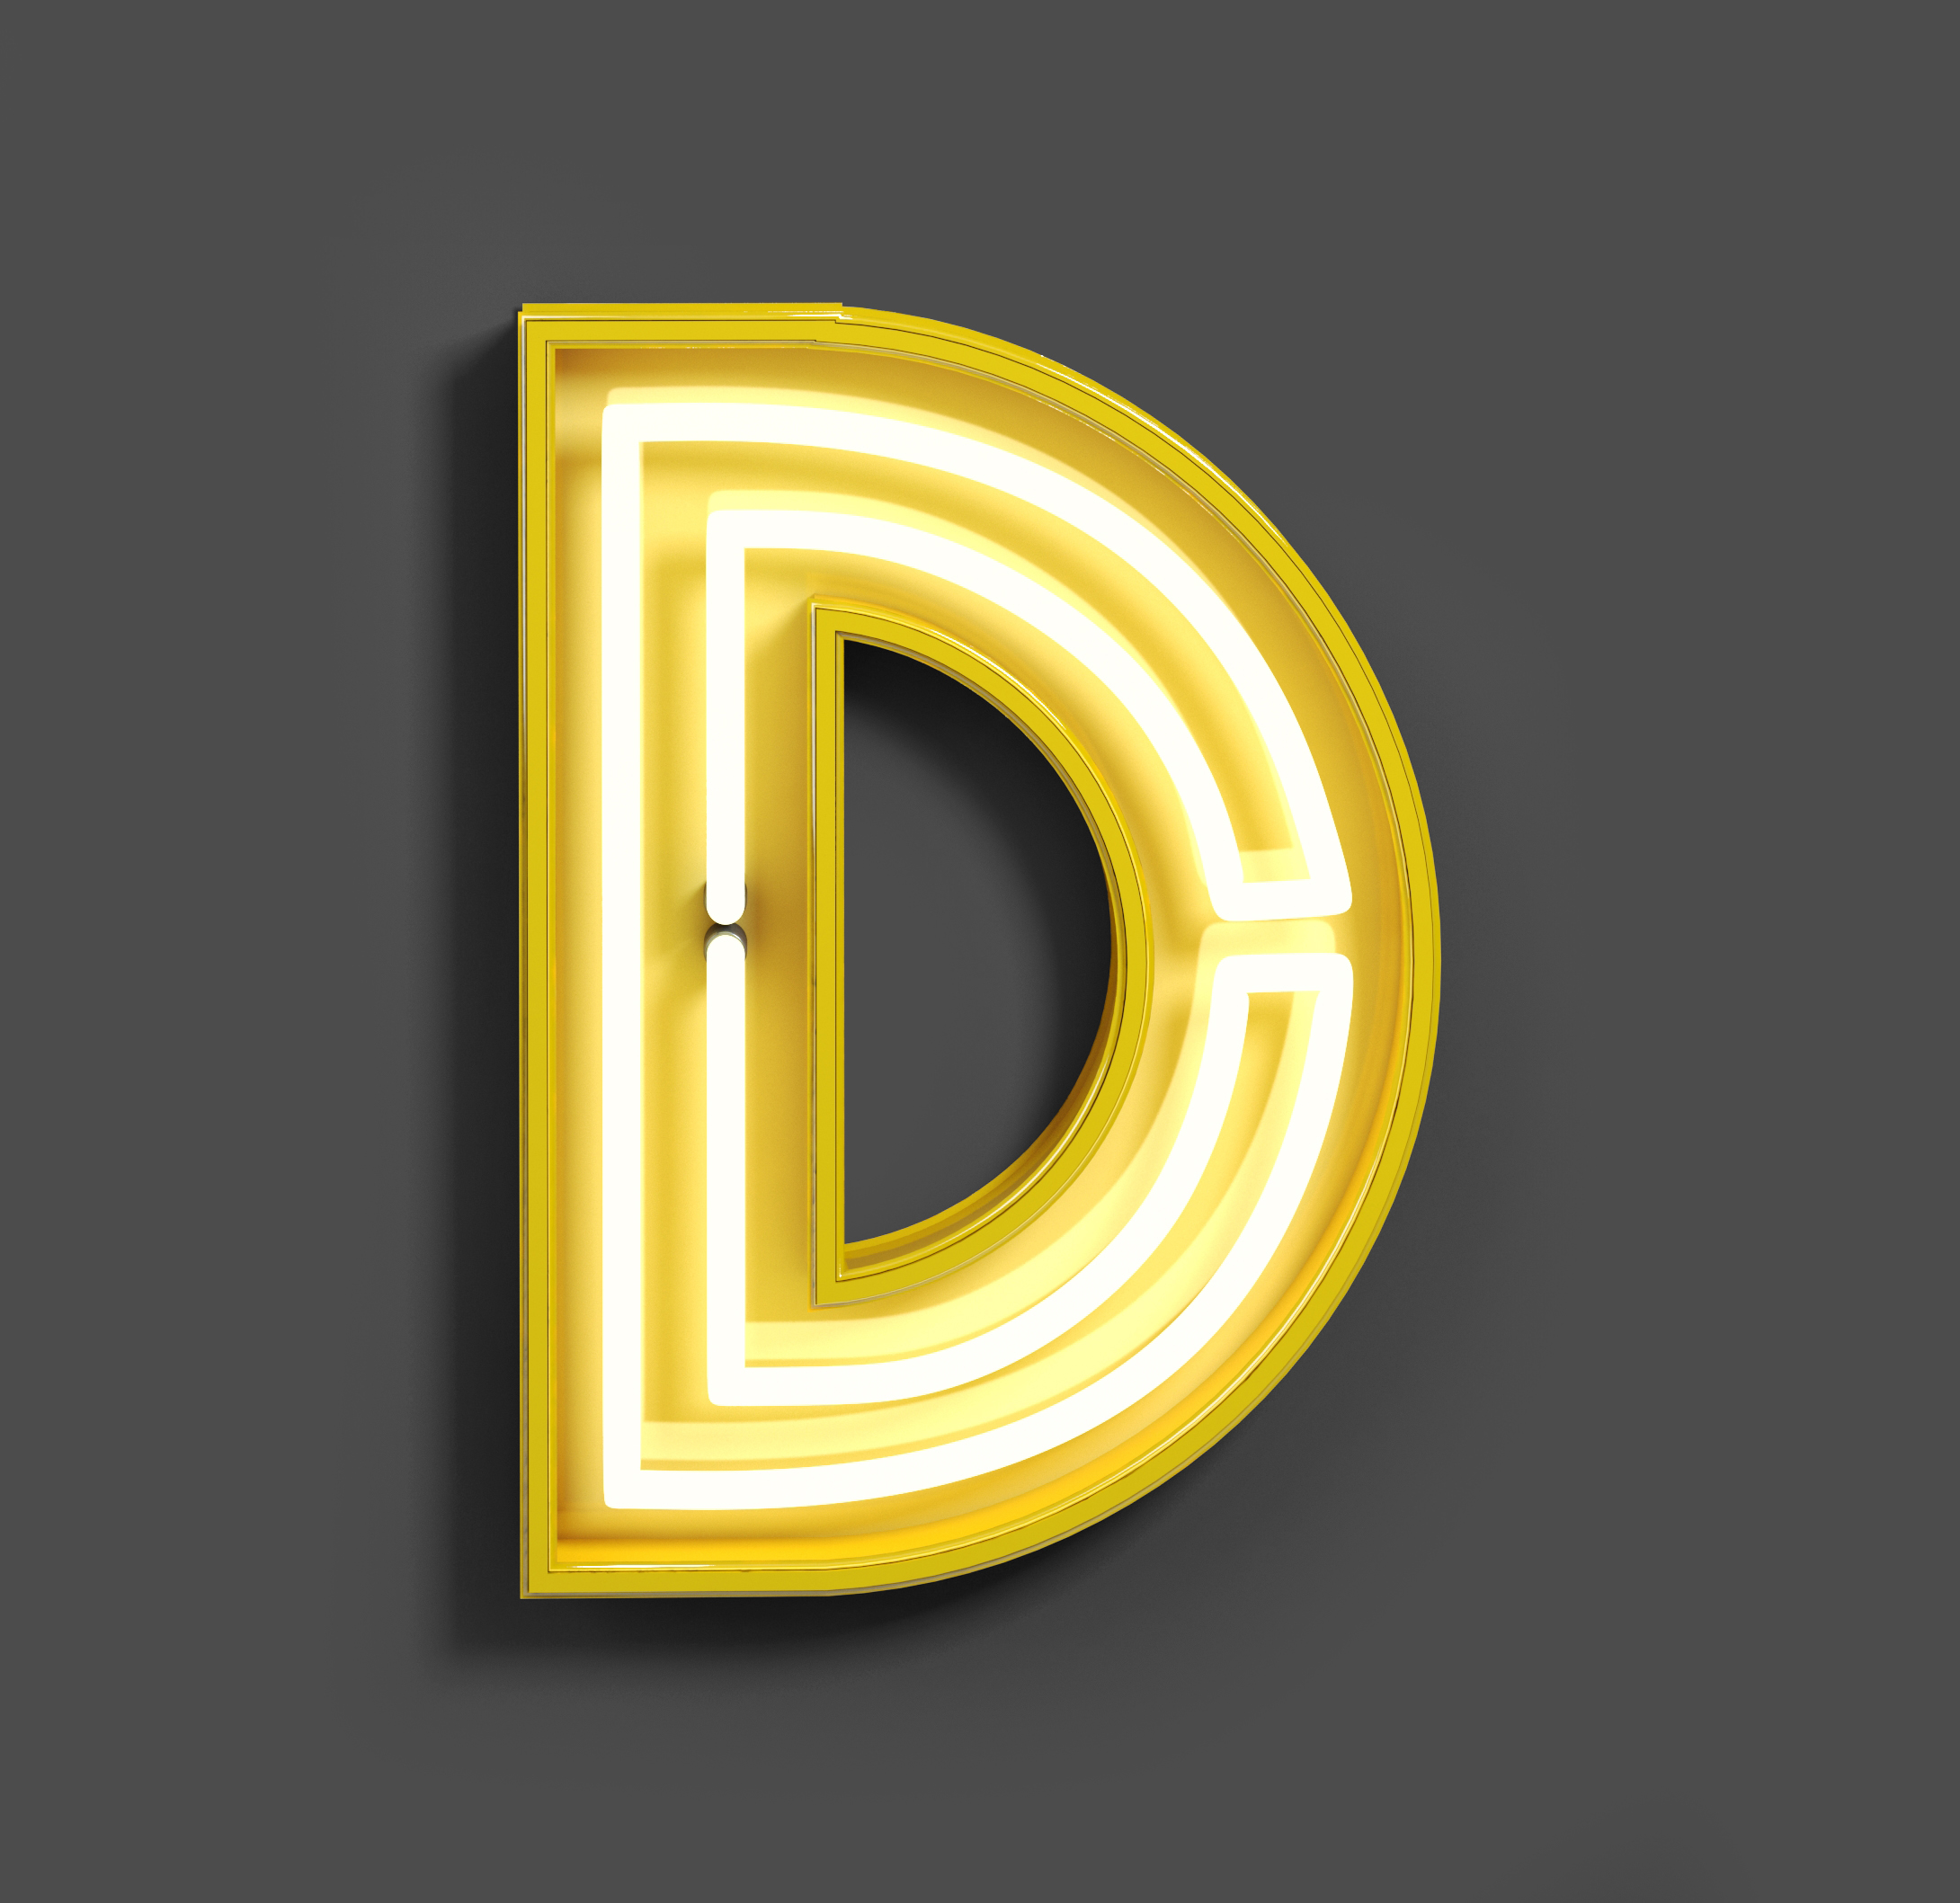 D letter as a neon sign